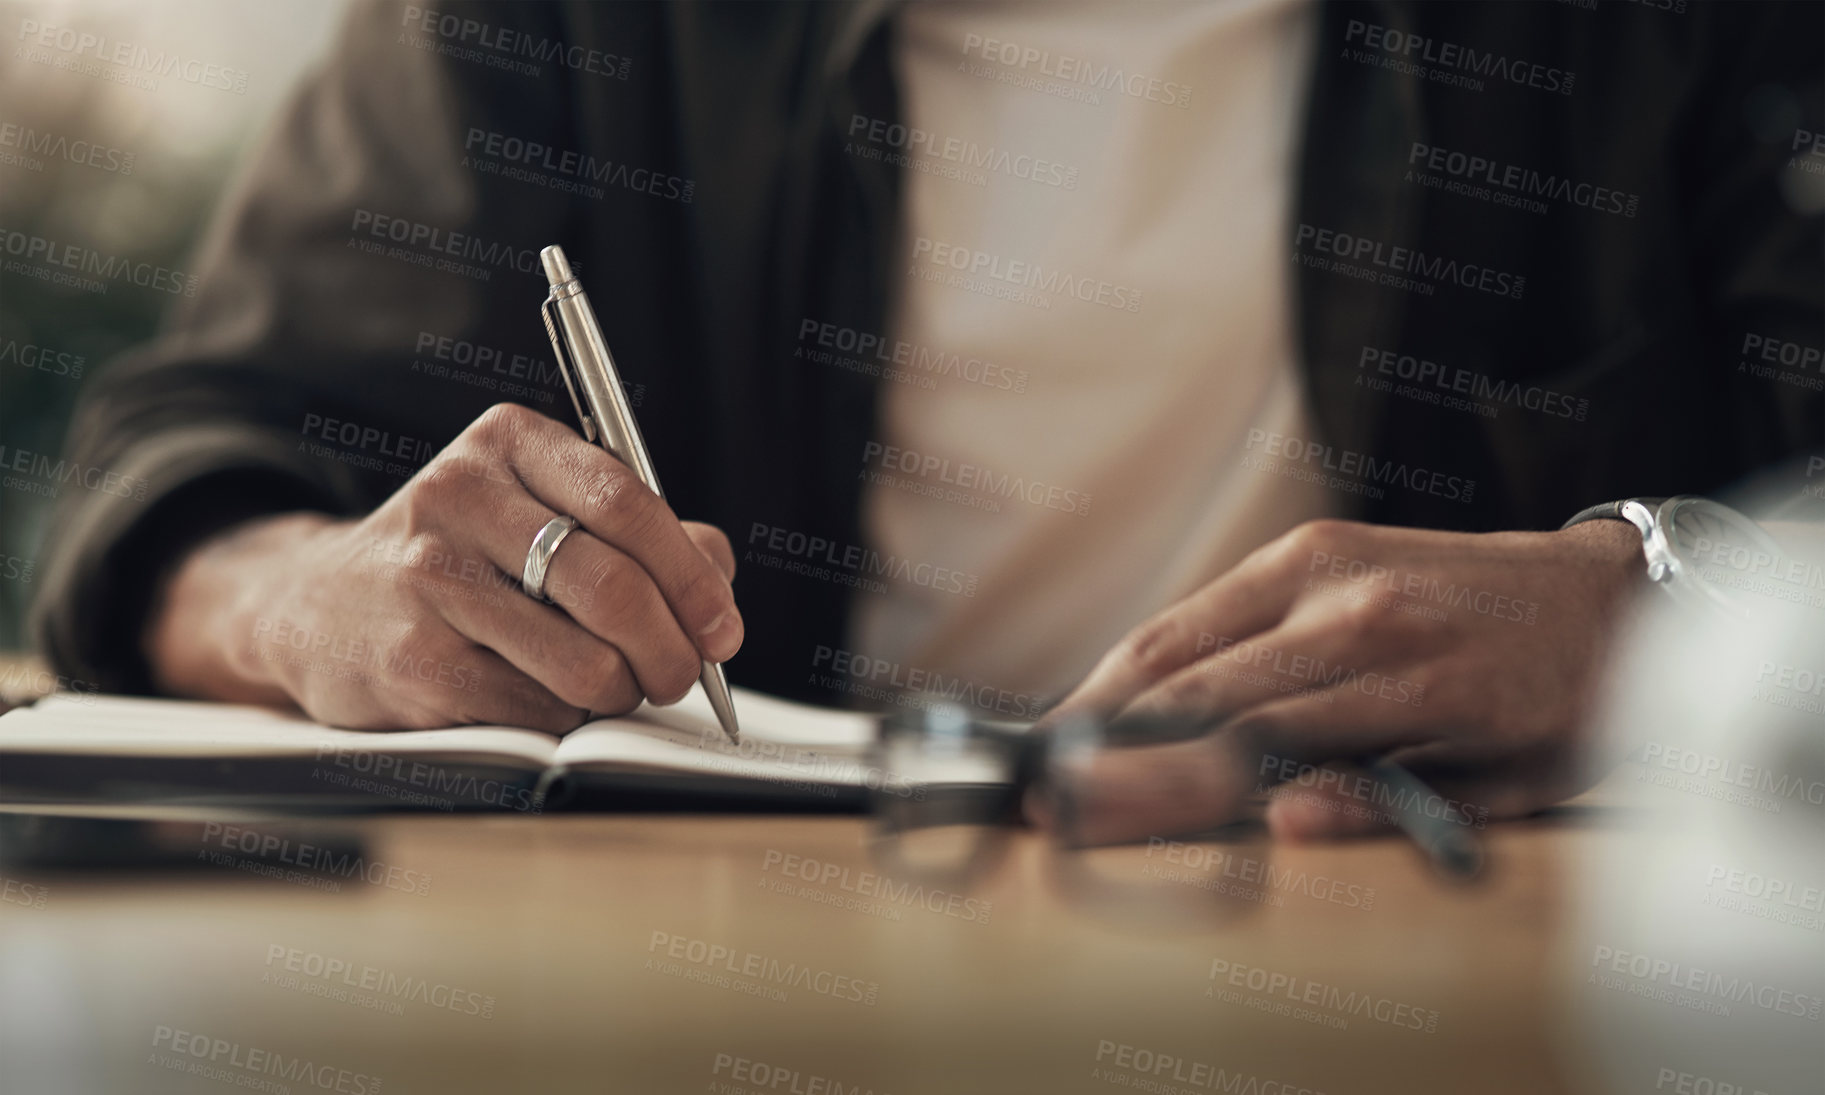 Buy stock photo Shot of an unrecognisable businessman writing in a notebook during a late night at work